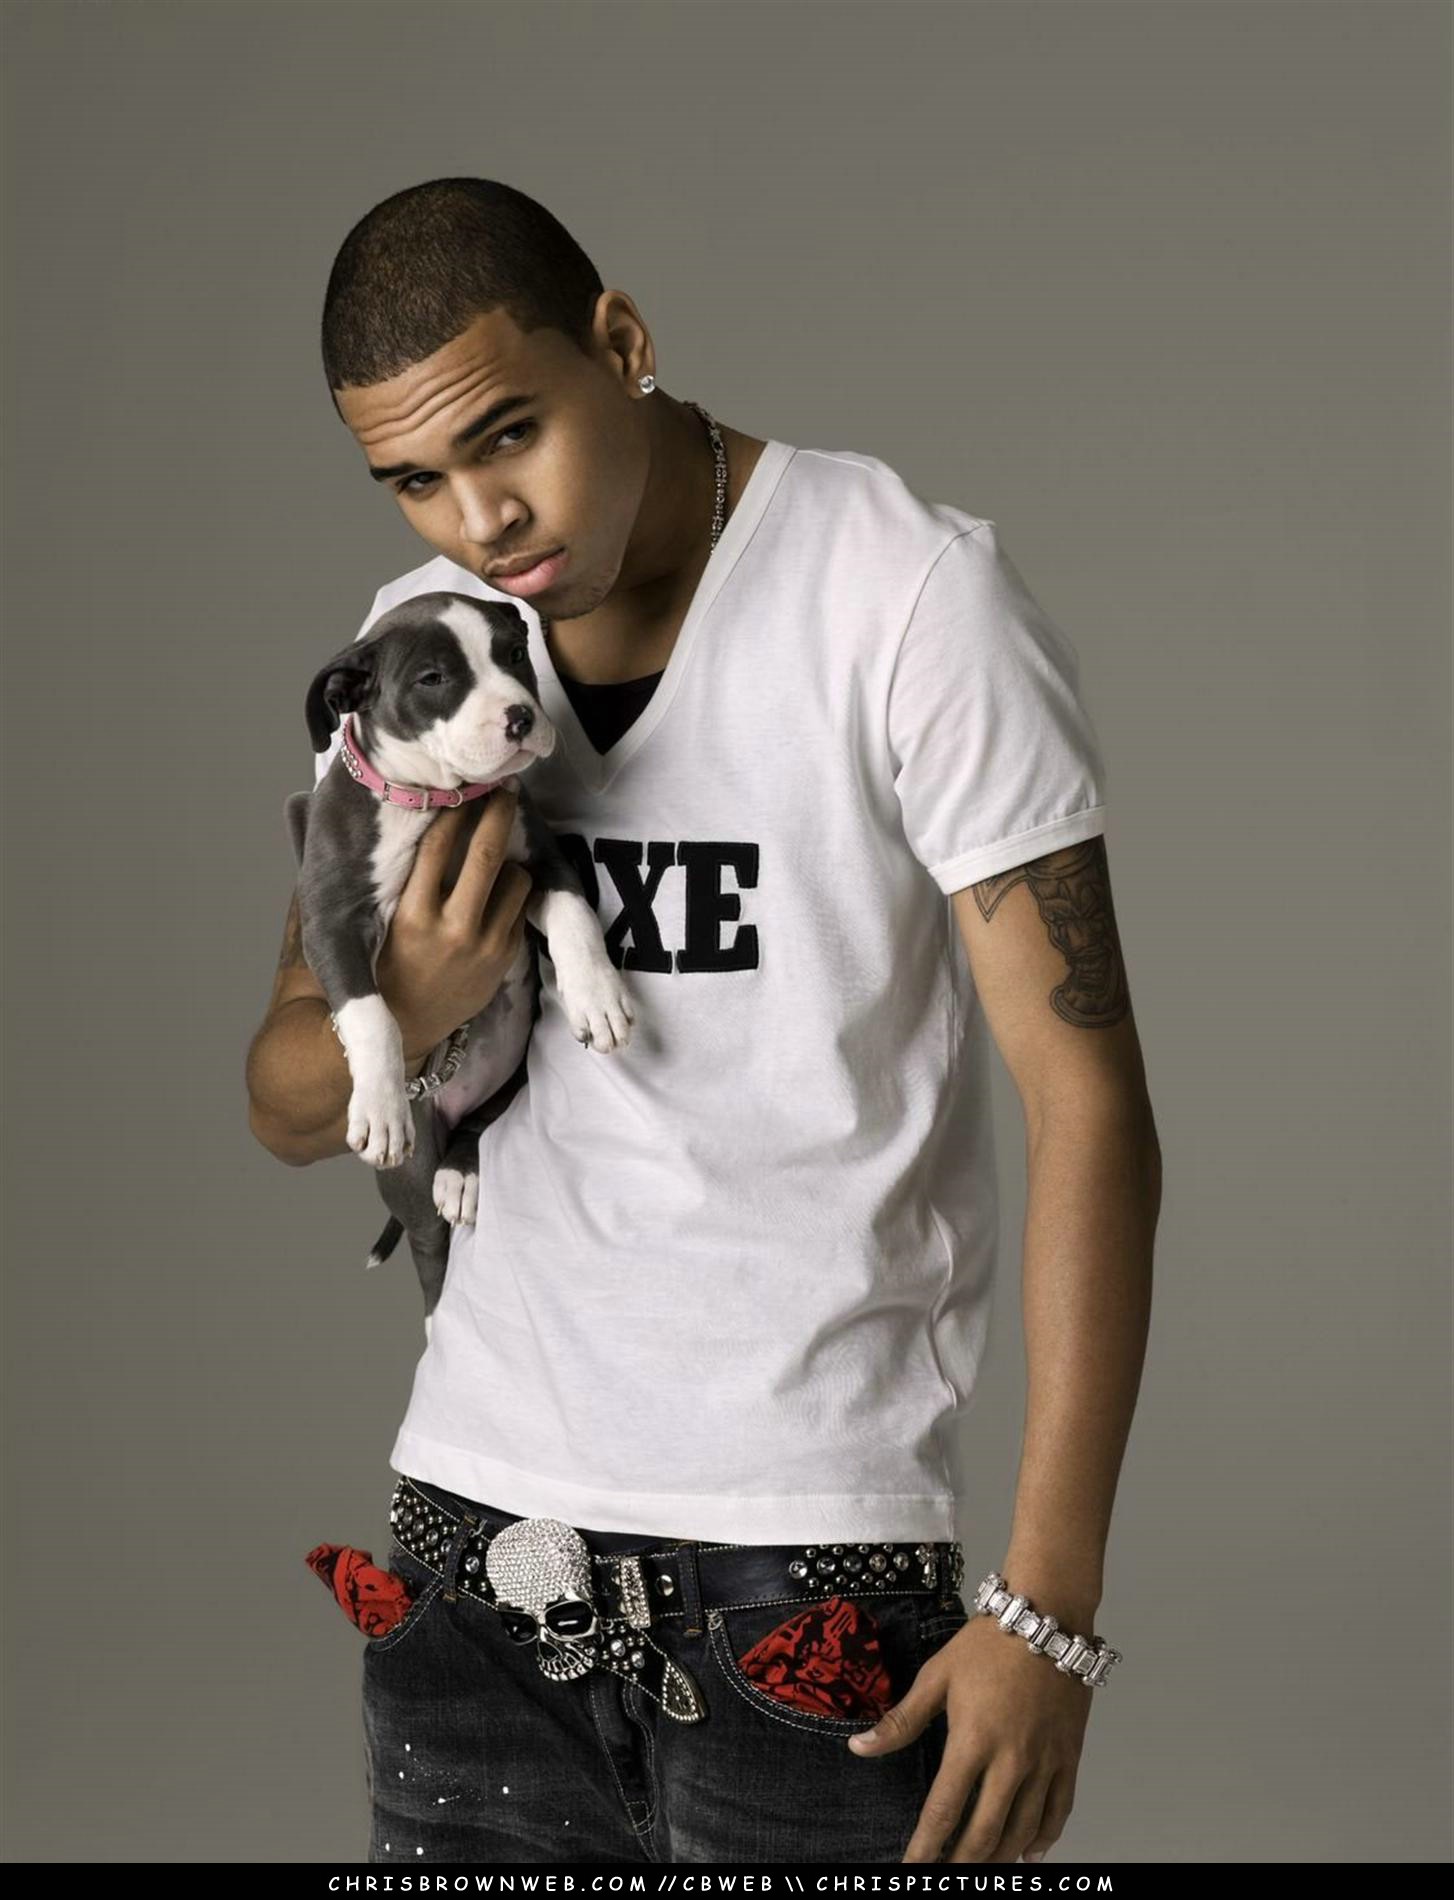 Chris Brown - Picture Gallery